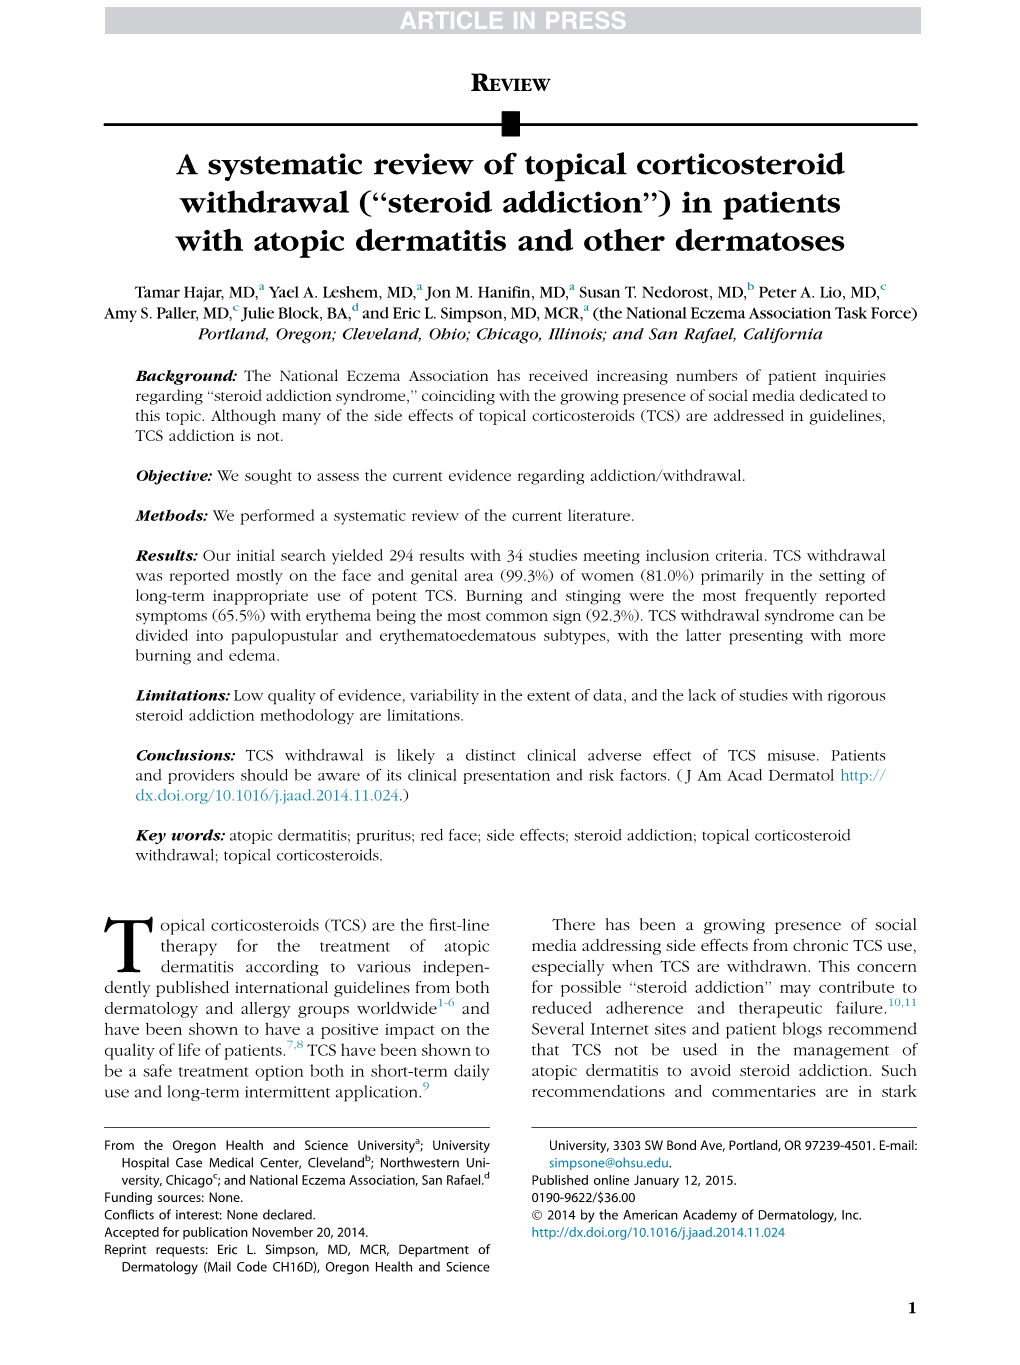 A Systematic Review of Topical Corticosteroid Withdrawal (``Steroid Addiction'') in Patients with Atopic Dermatitis